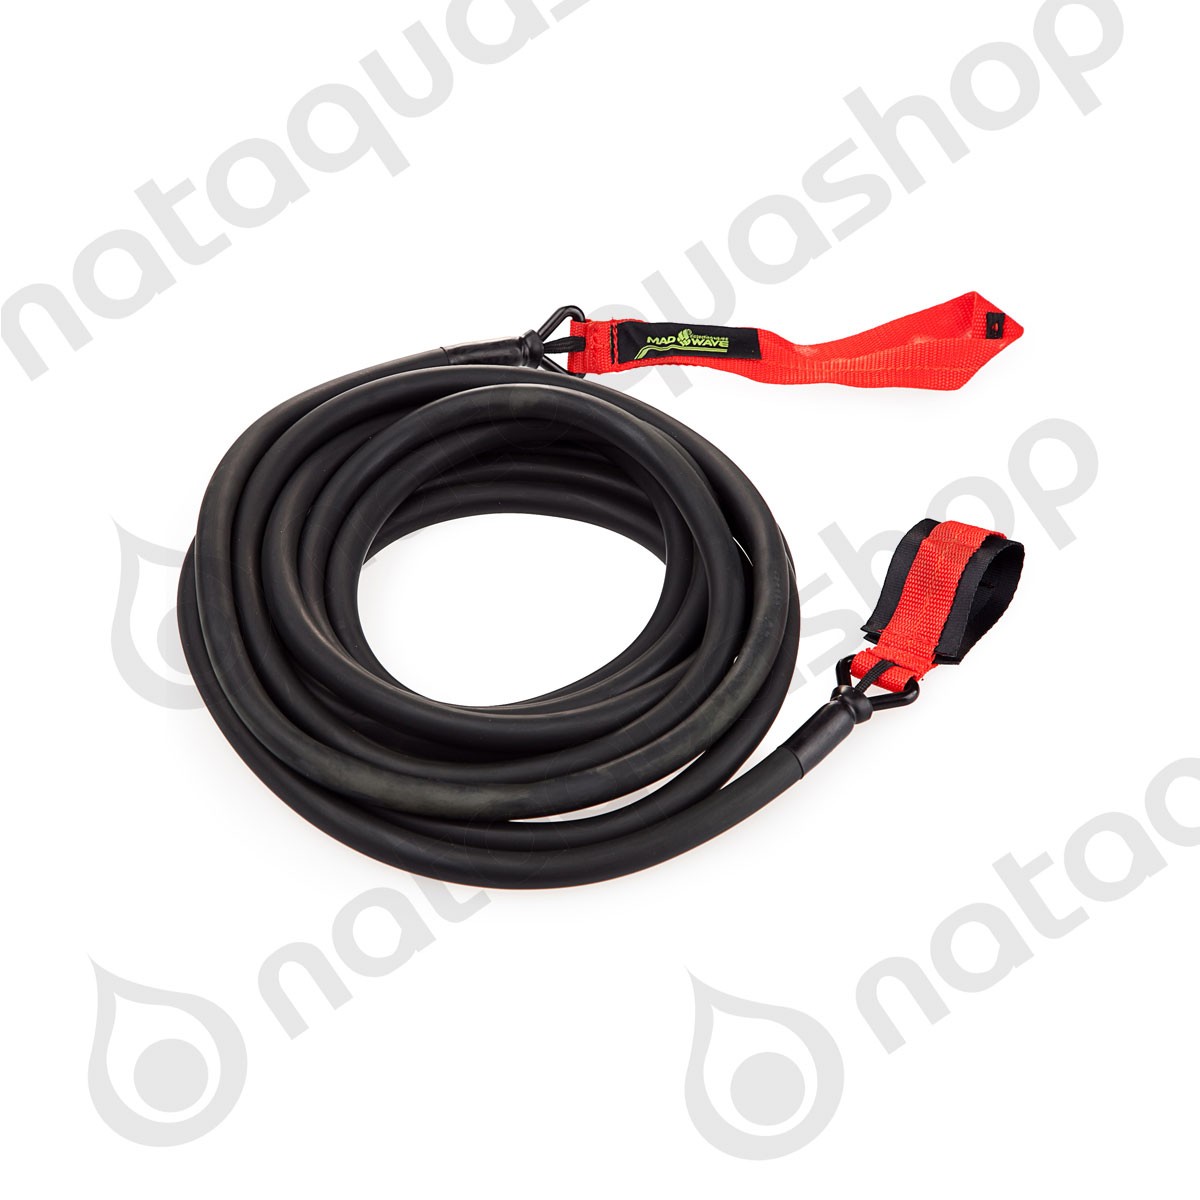 LONG SAFETY CORD Color